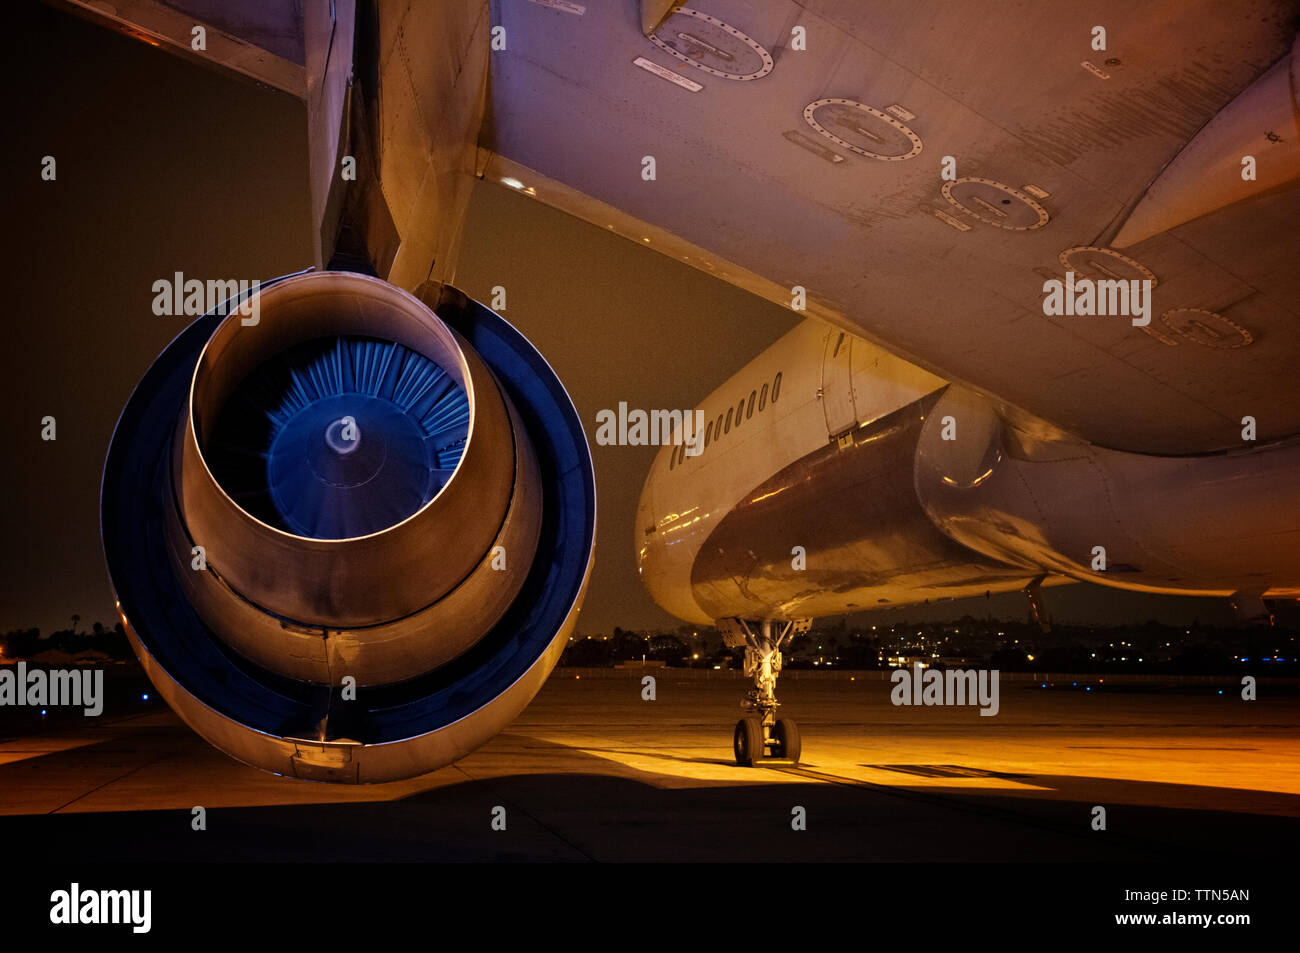 Close-up of jet engine at airport during night Stock Photo